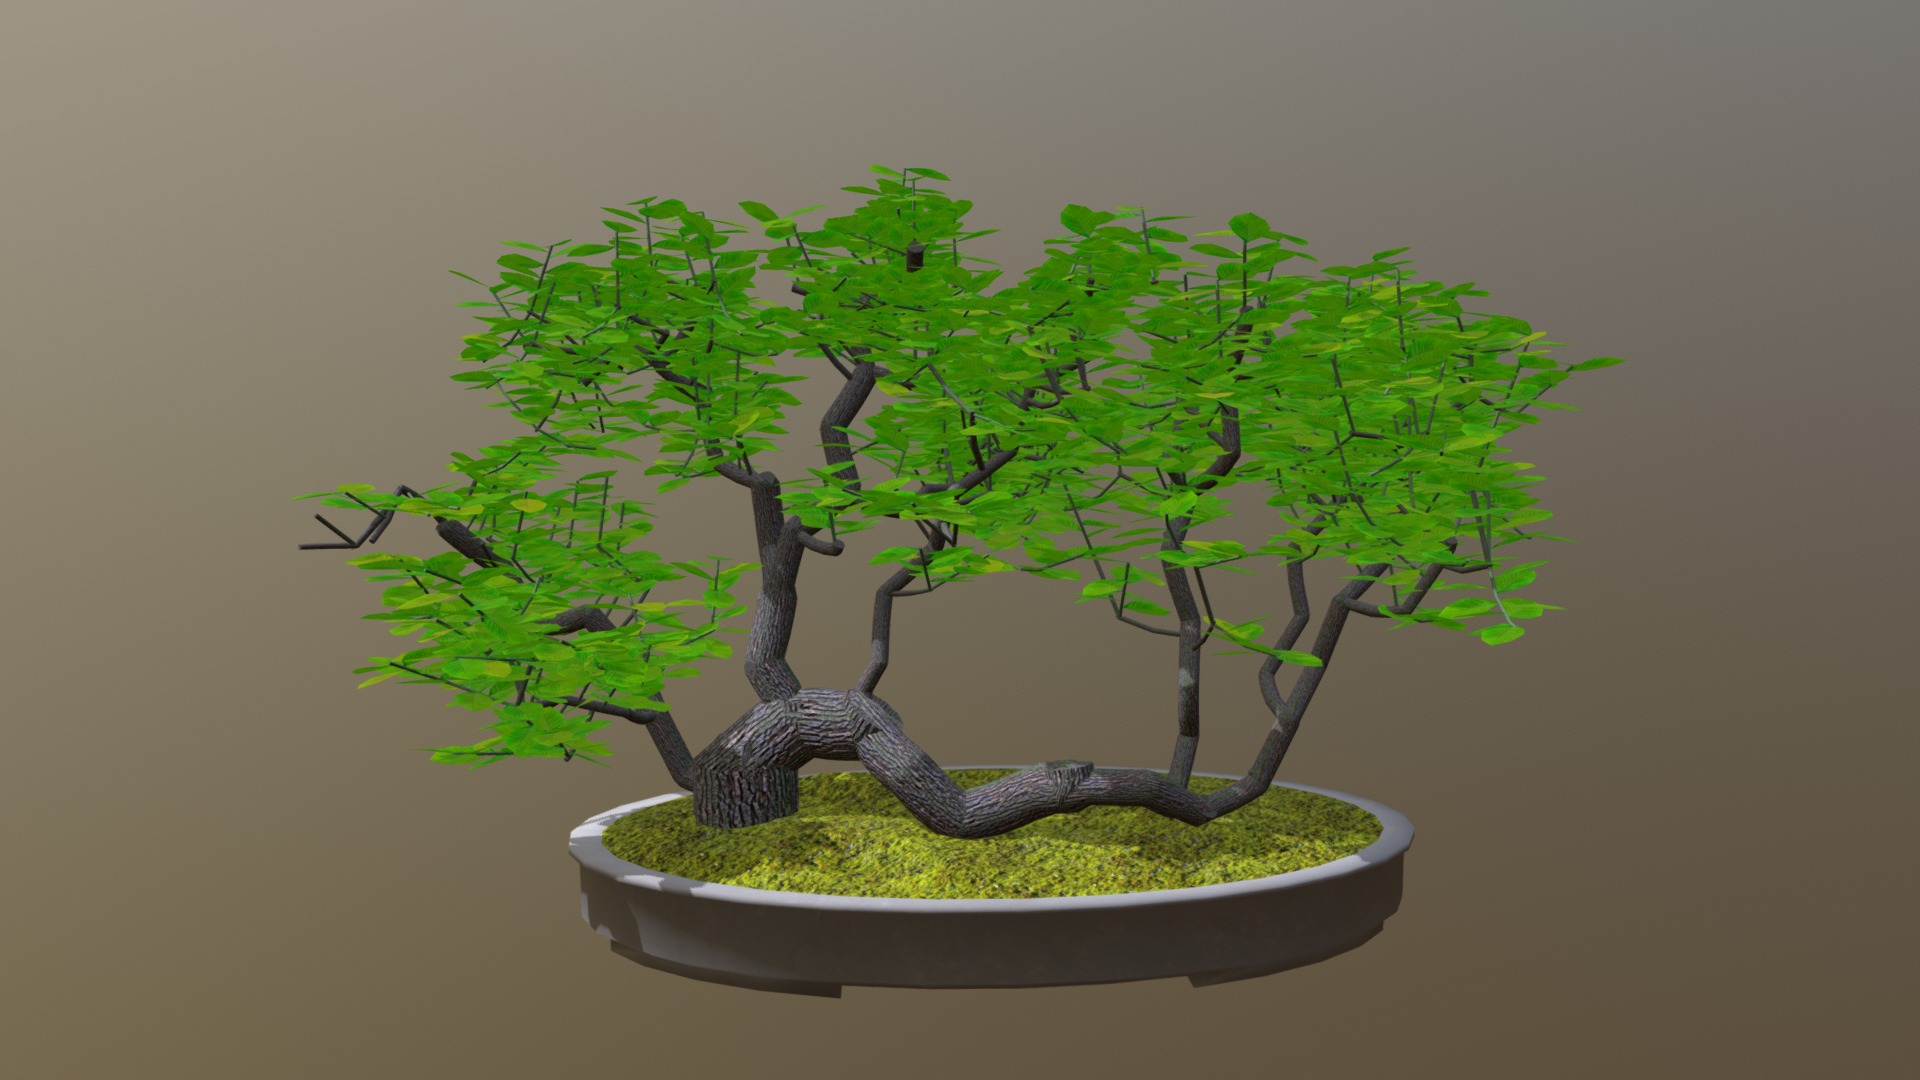 3D model Raft - This is a 3D model of the Raft. The 3D model is about a tree with a small bonsai tree on a plate.